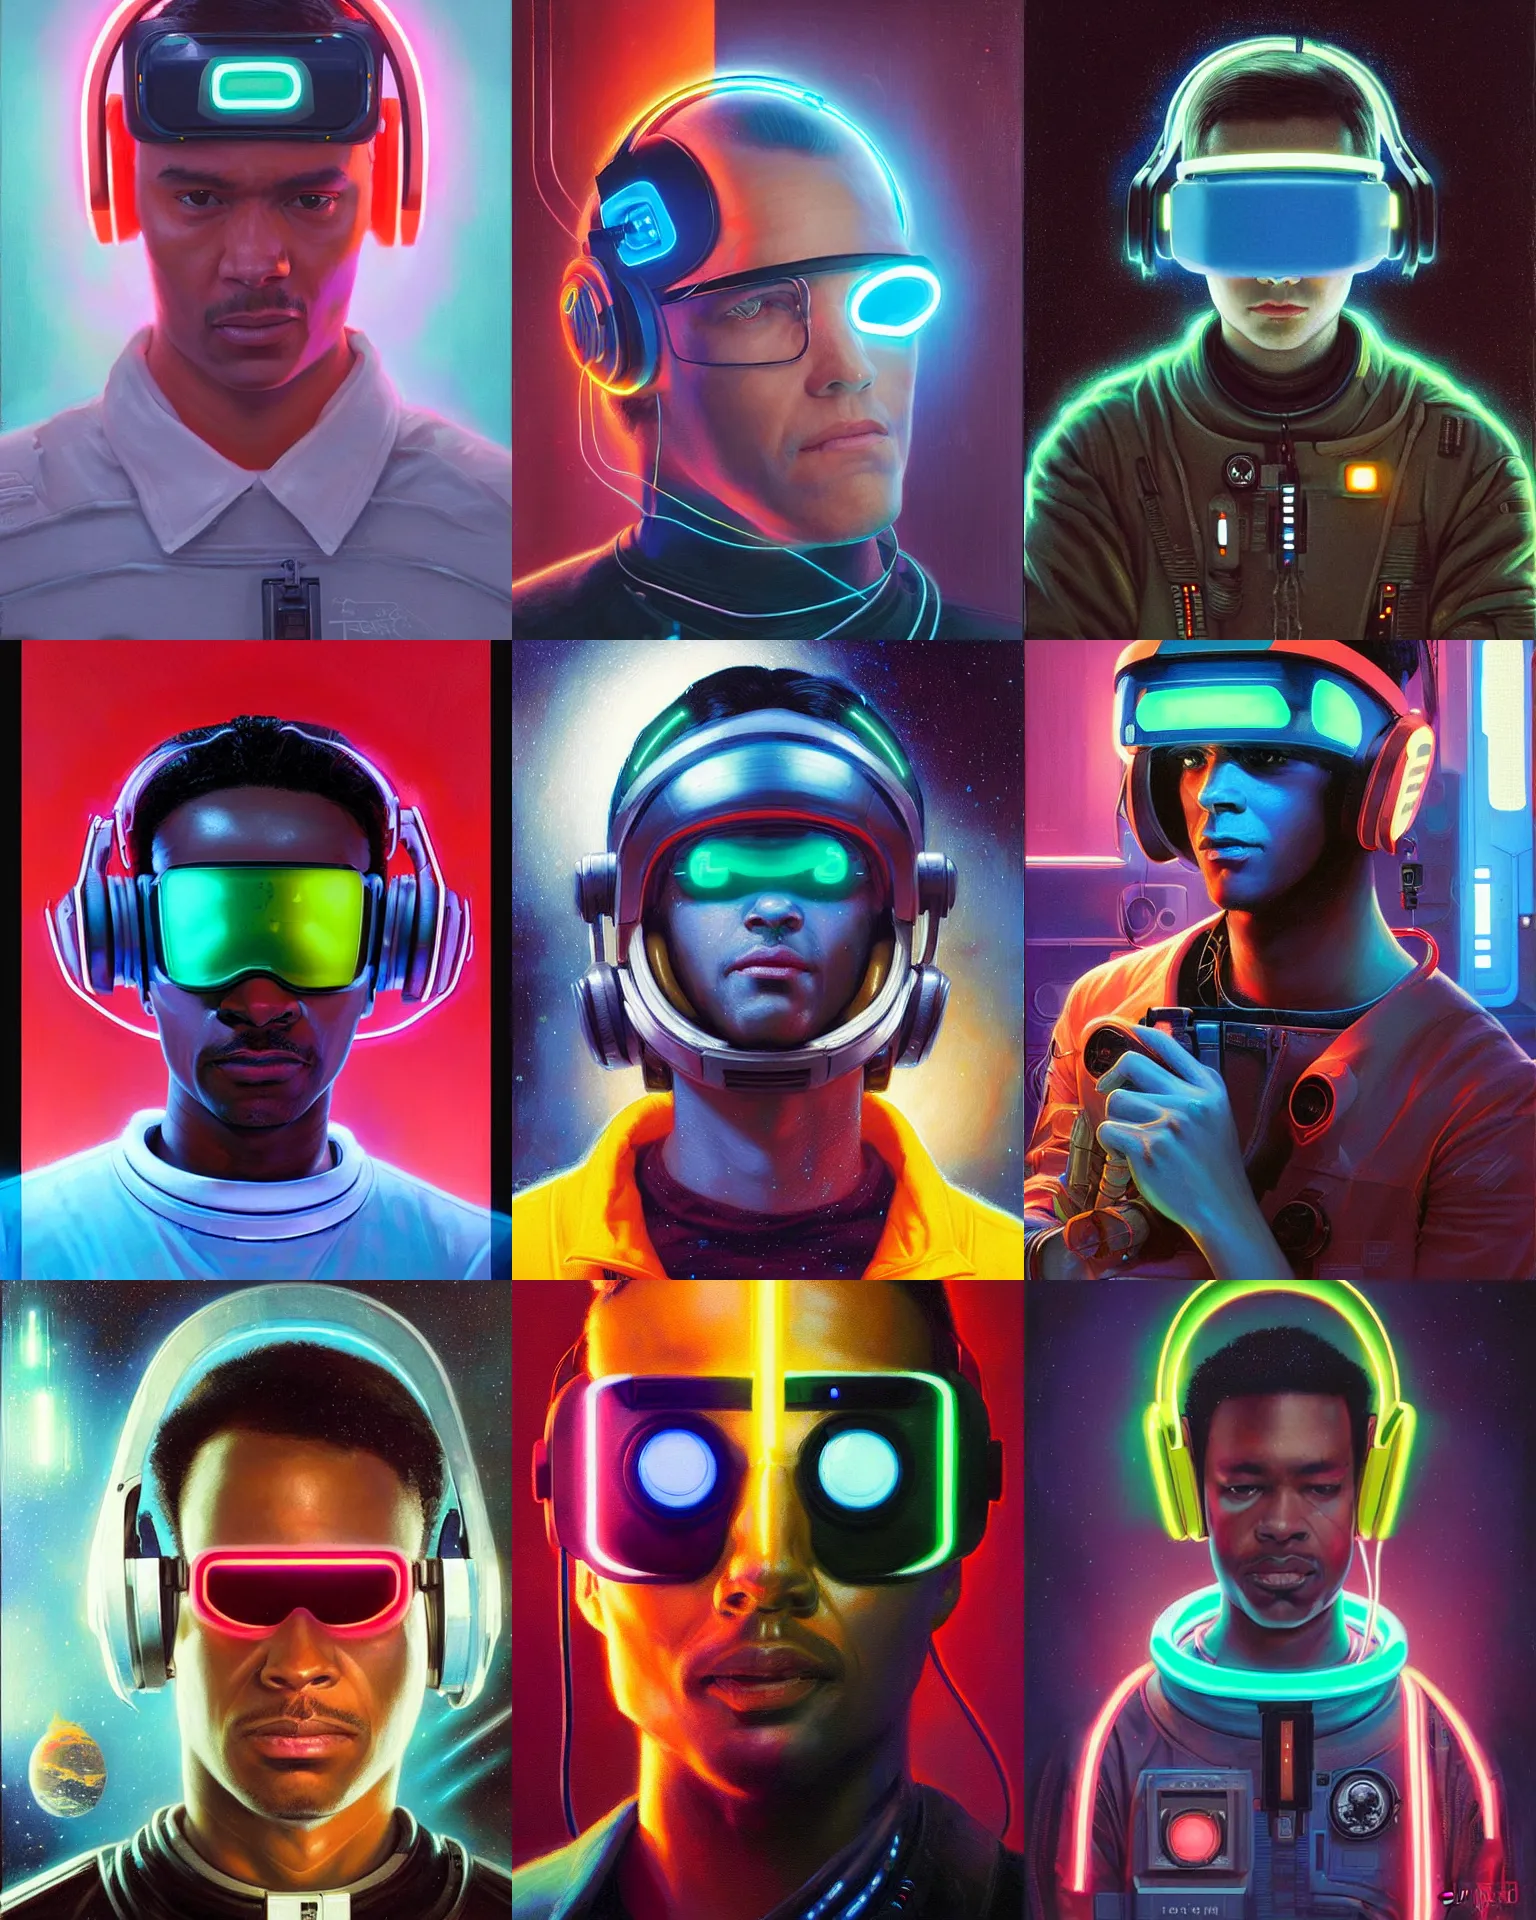 Prompt: neon cyberpunk programmer with glowing geordi visor over eyes and sleek headphones headshot desaturated portrait painting by donato giancola, dean cornwall, rhads, tom whalen, conrad roset astronaut fashion photography